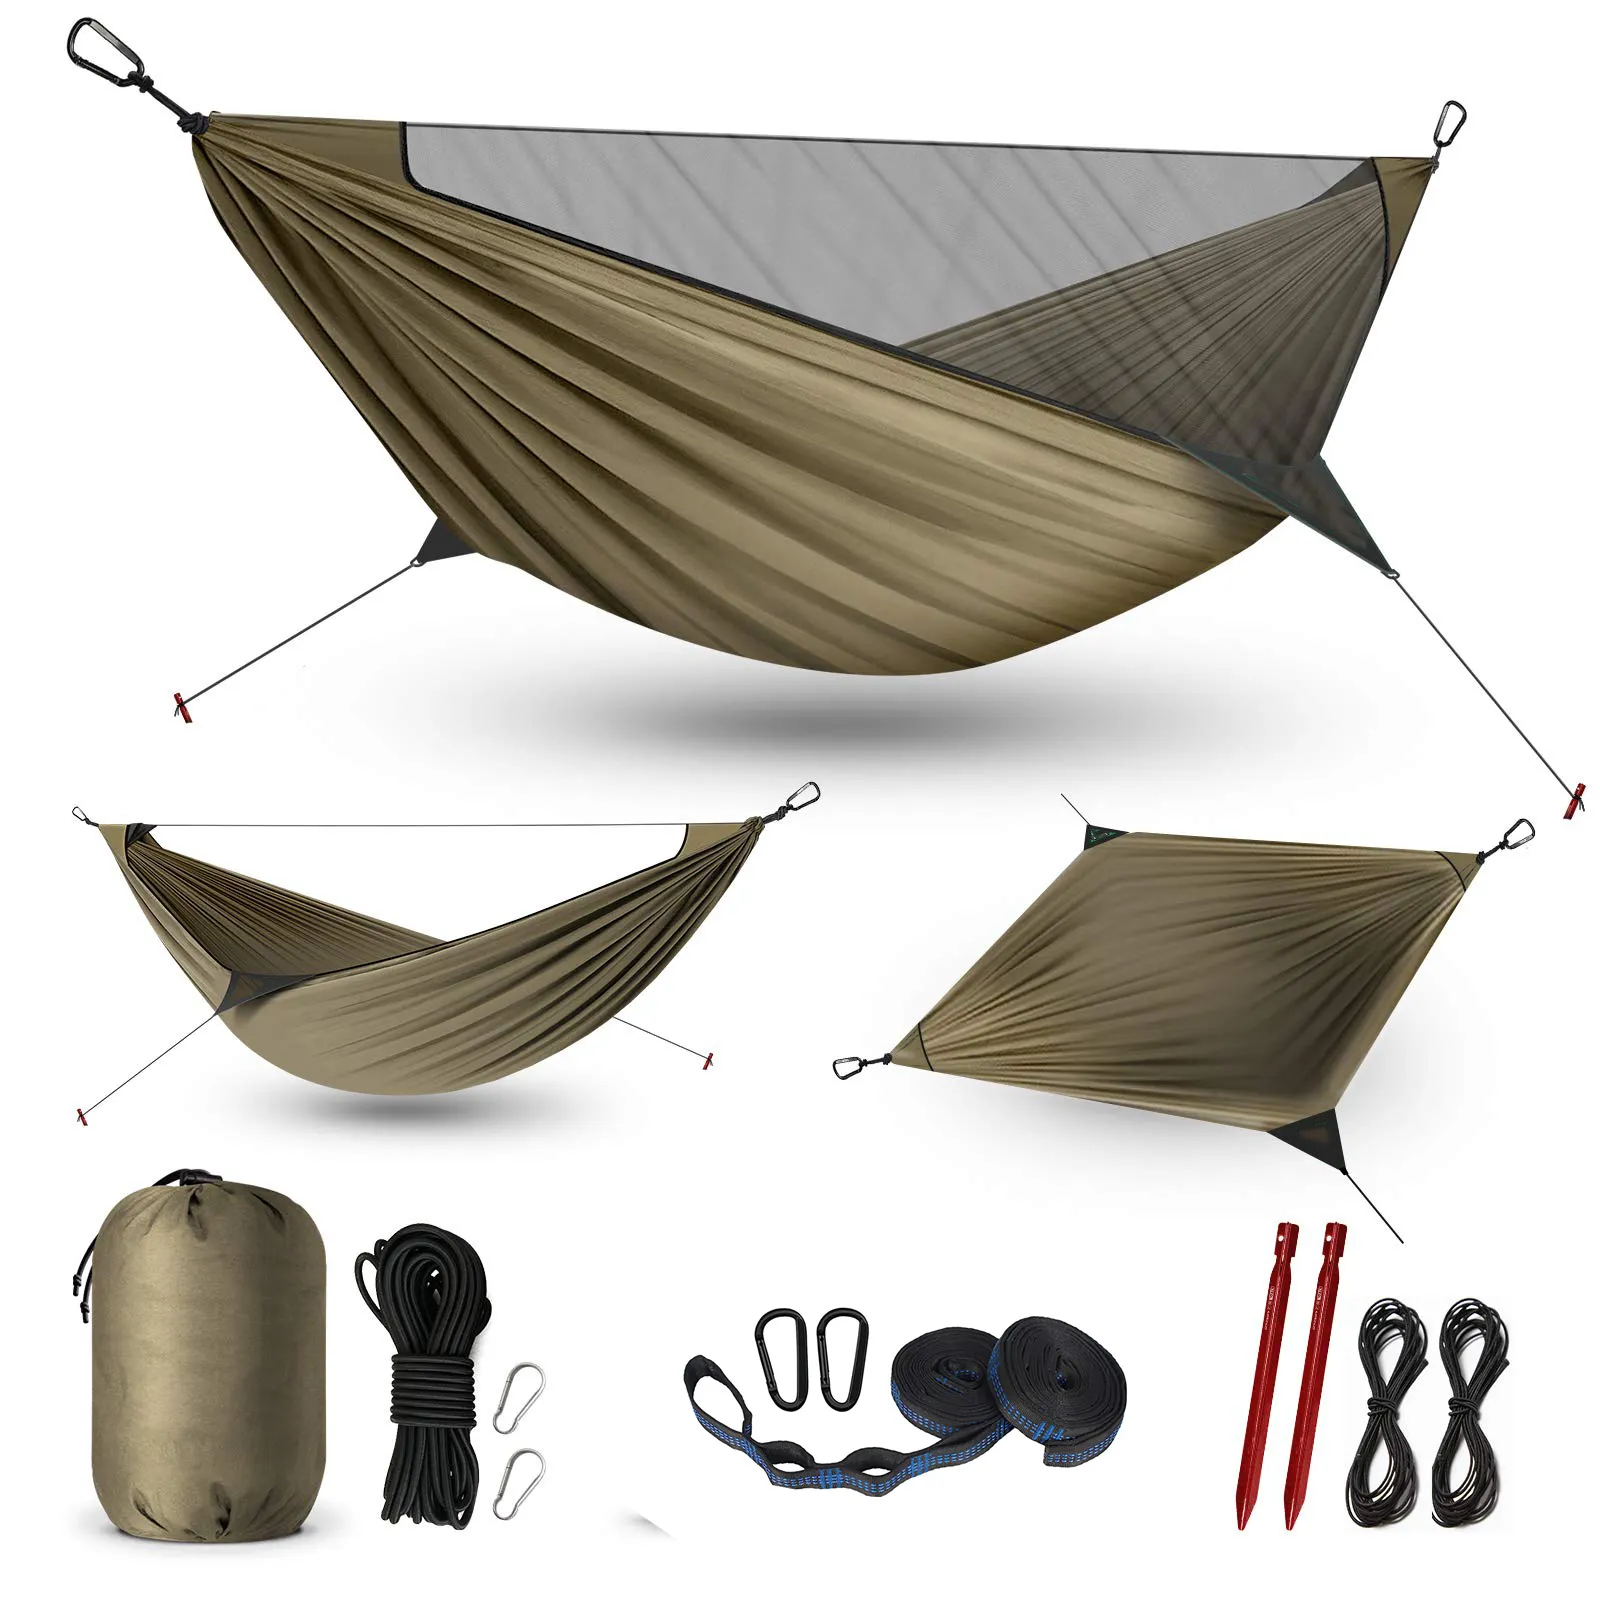 Amazon Hot Sale Outdoor Hammock Hiking Camping Hammock With Mosquito Net